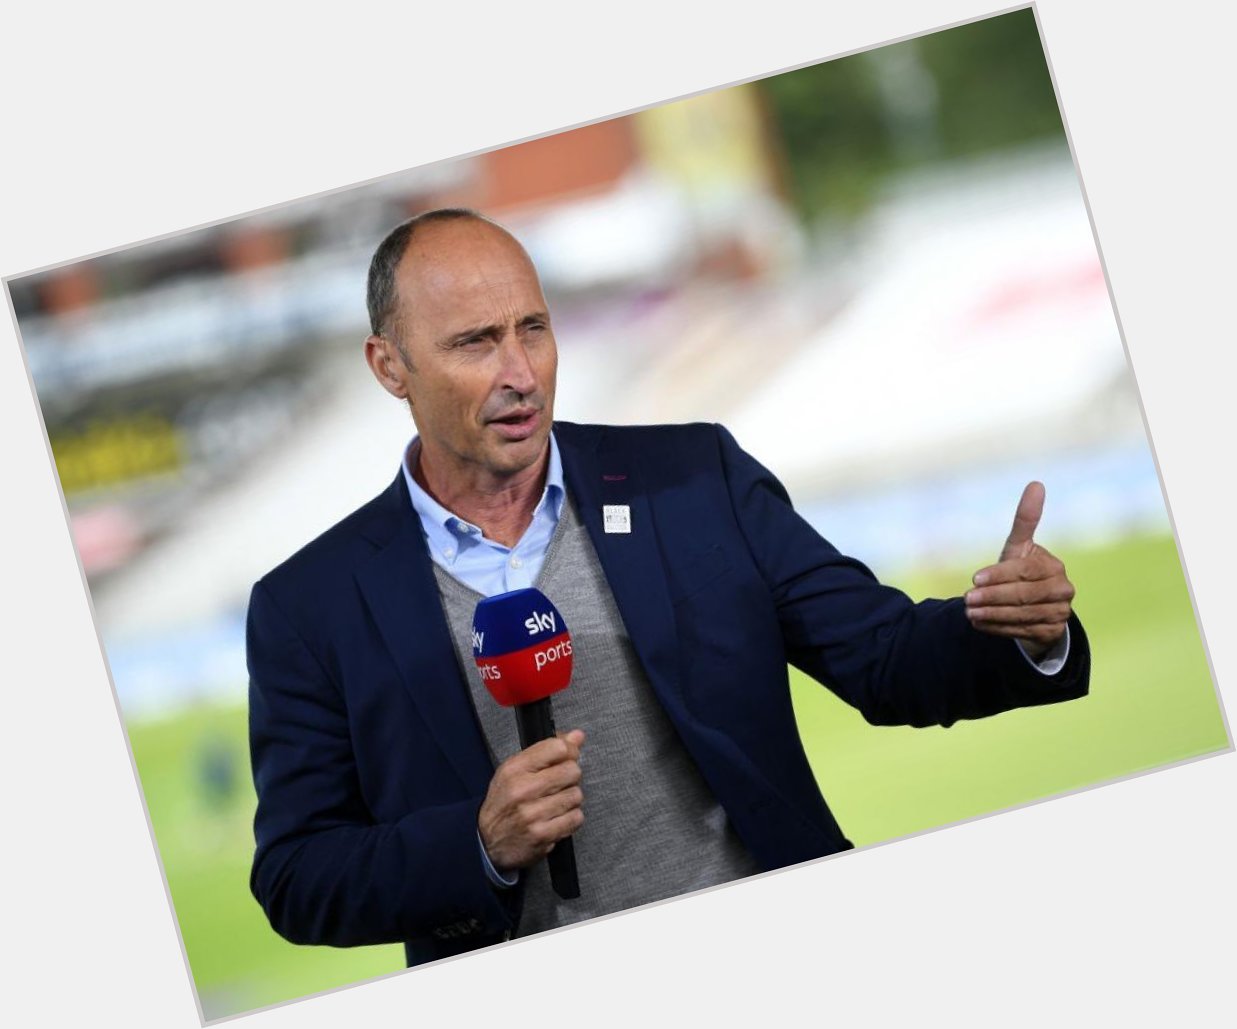 An England cricketing icon and now one of the brightest brains in the game.

Happy Birthday Nasser Hussain 